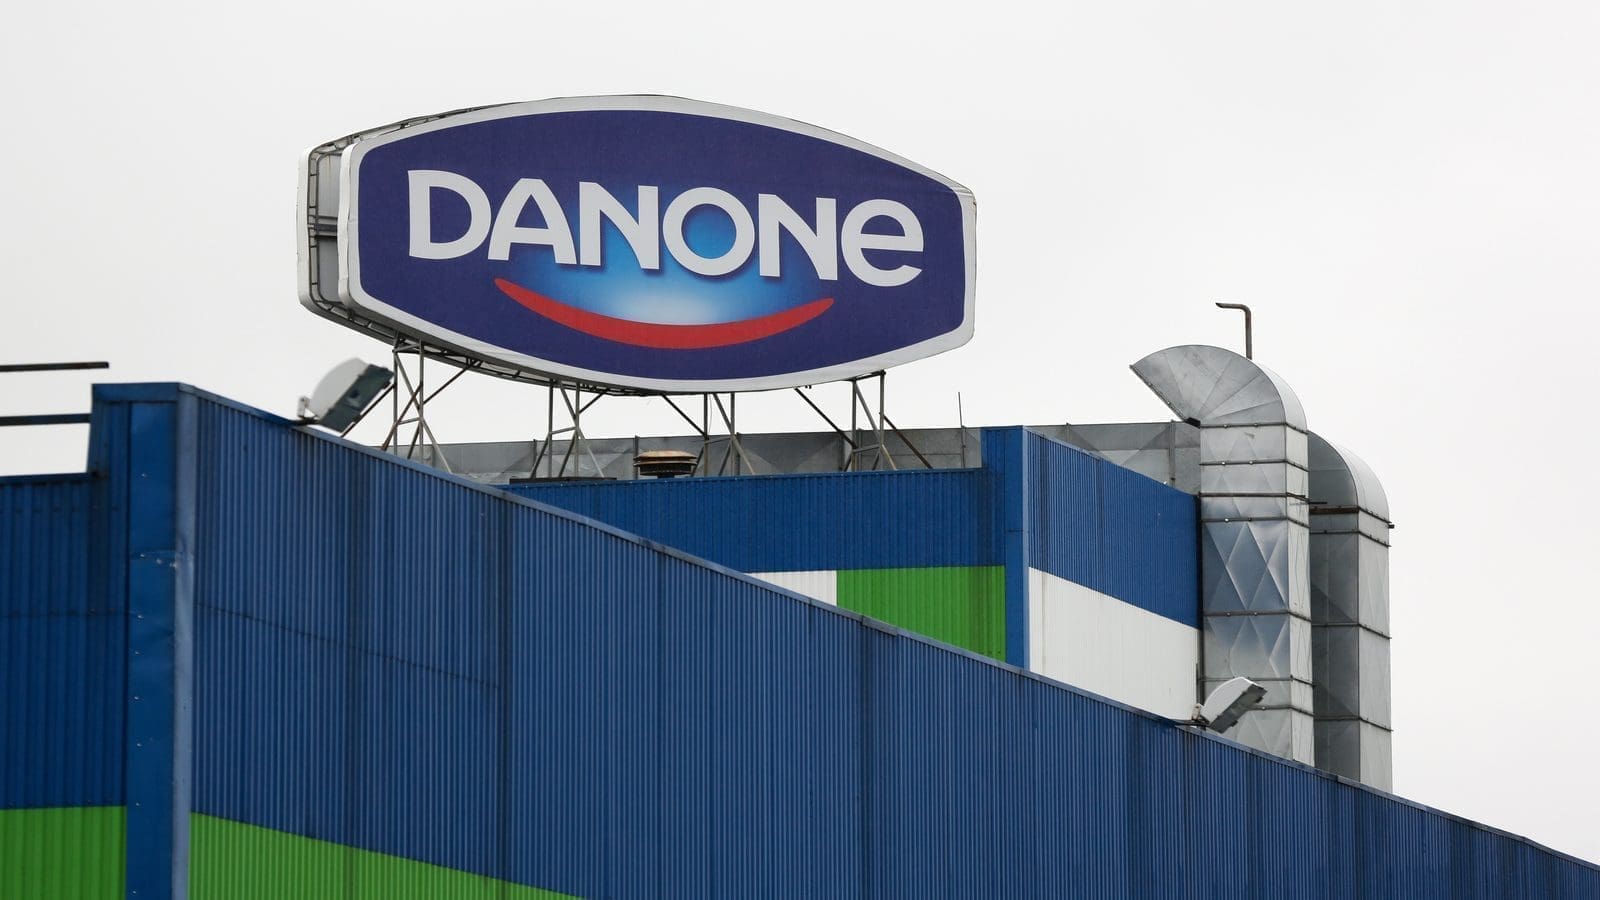 Danone officially opens the largest cold logistics facility in France